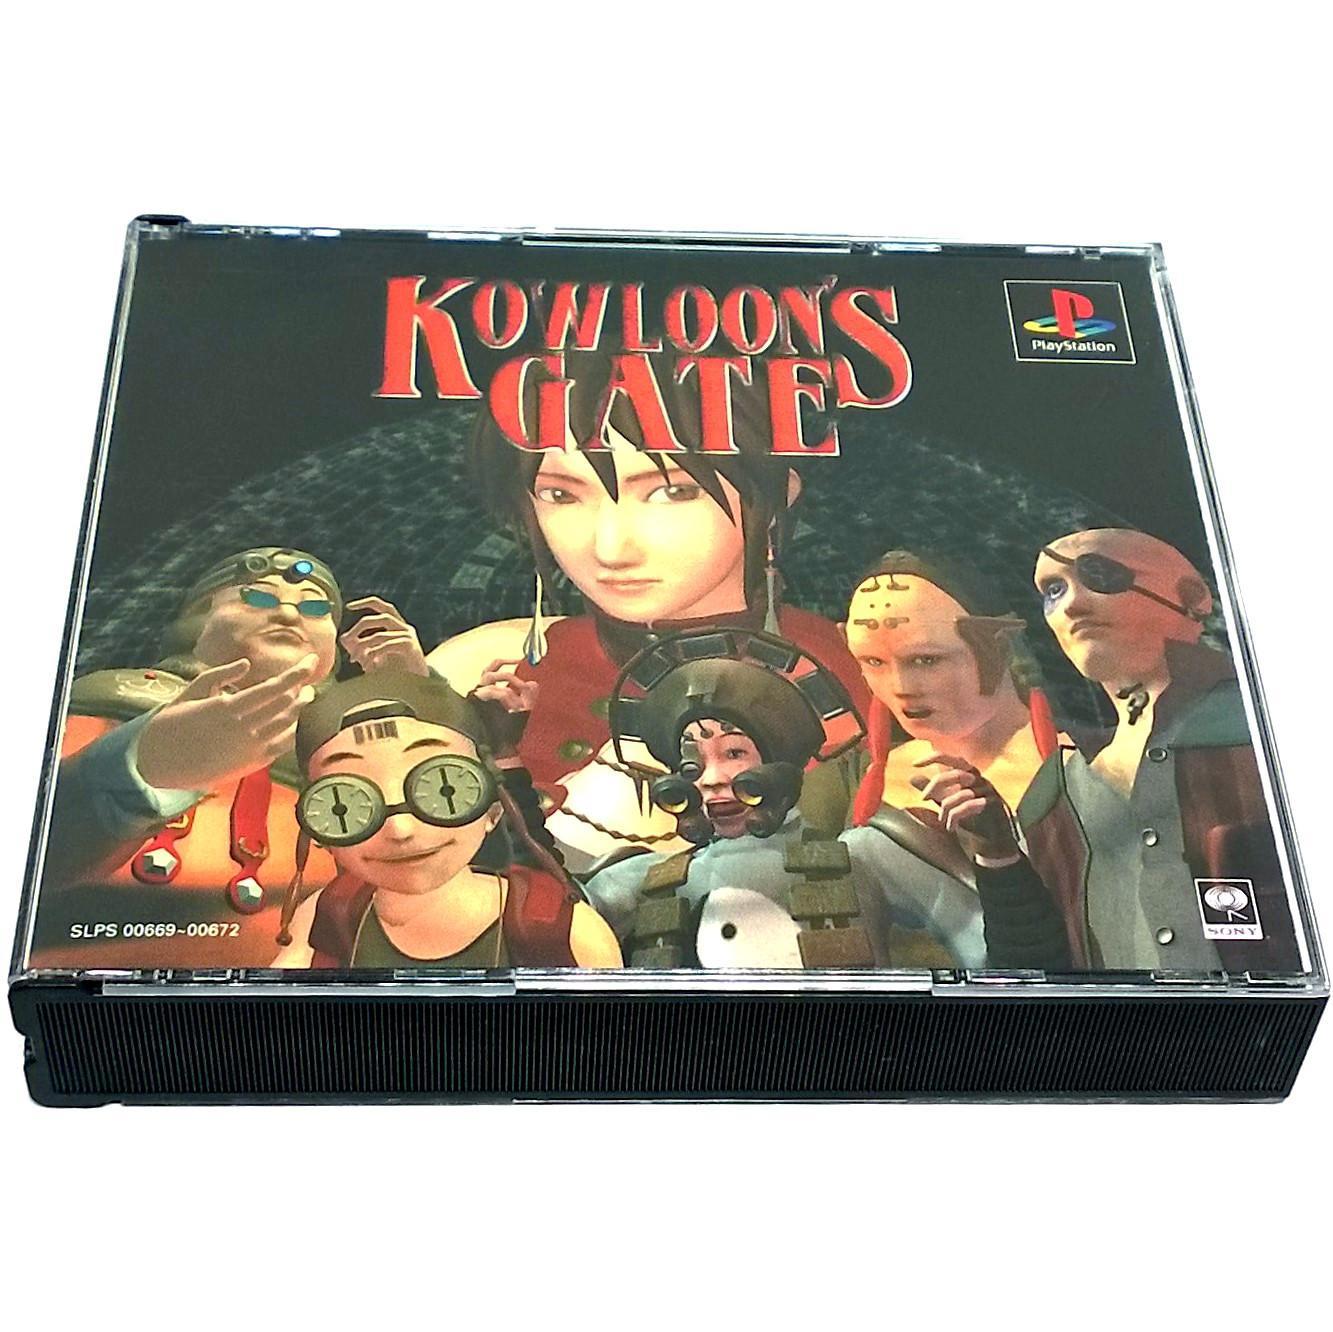 Kowloon's Gate for PlayStation (Import) - Front of case